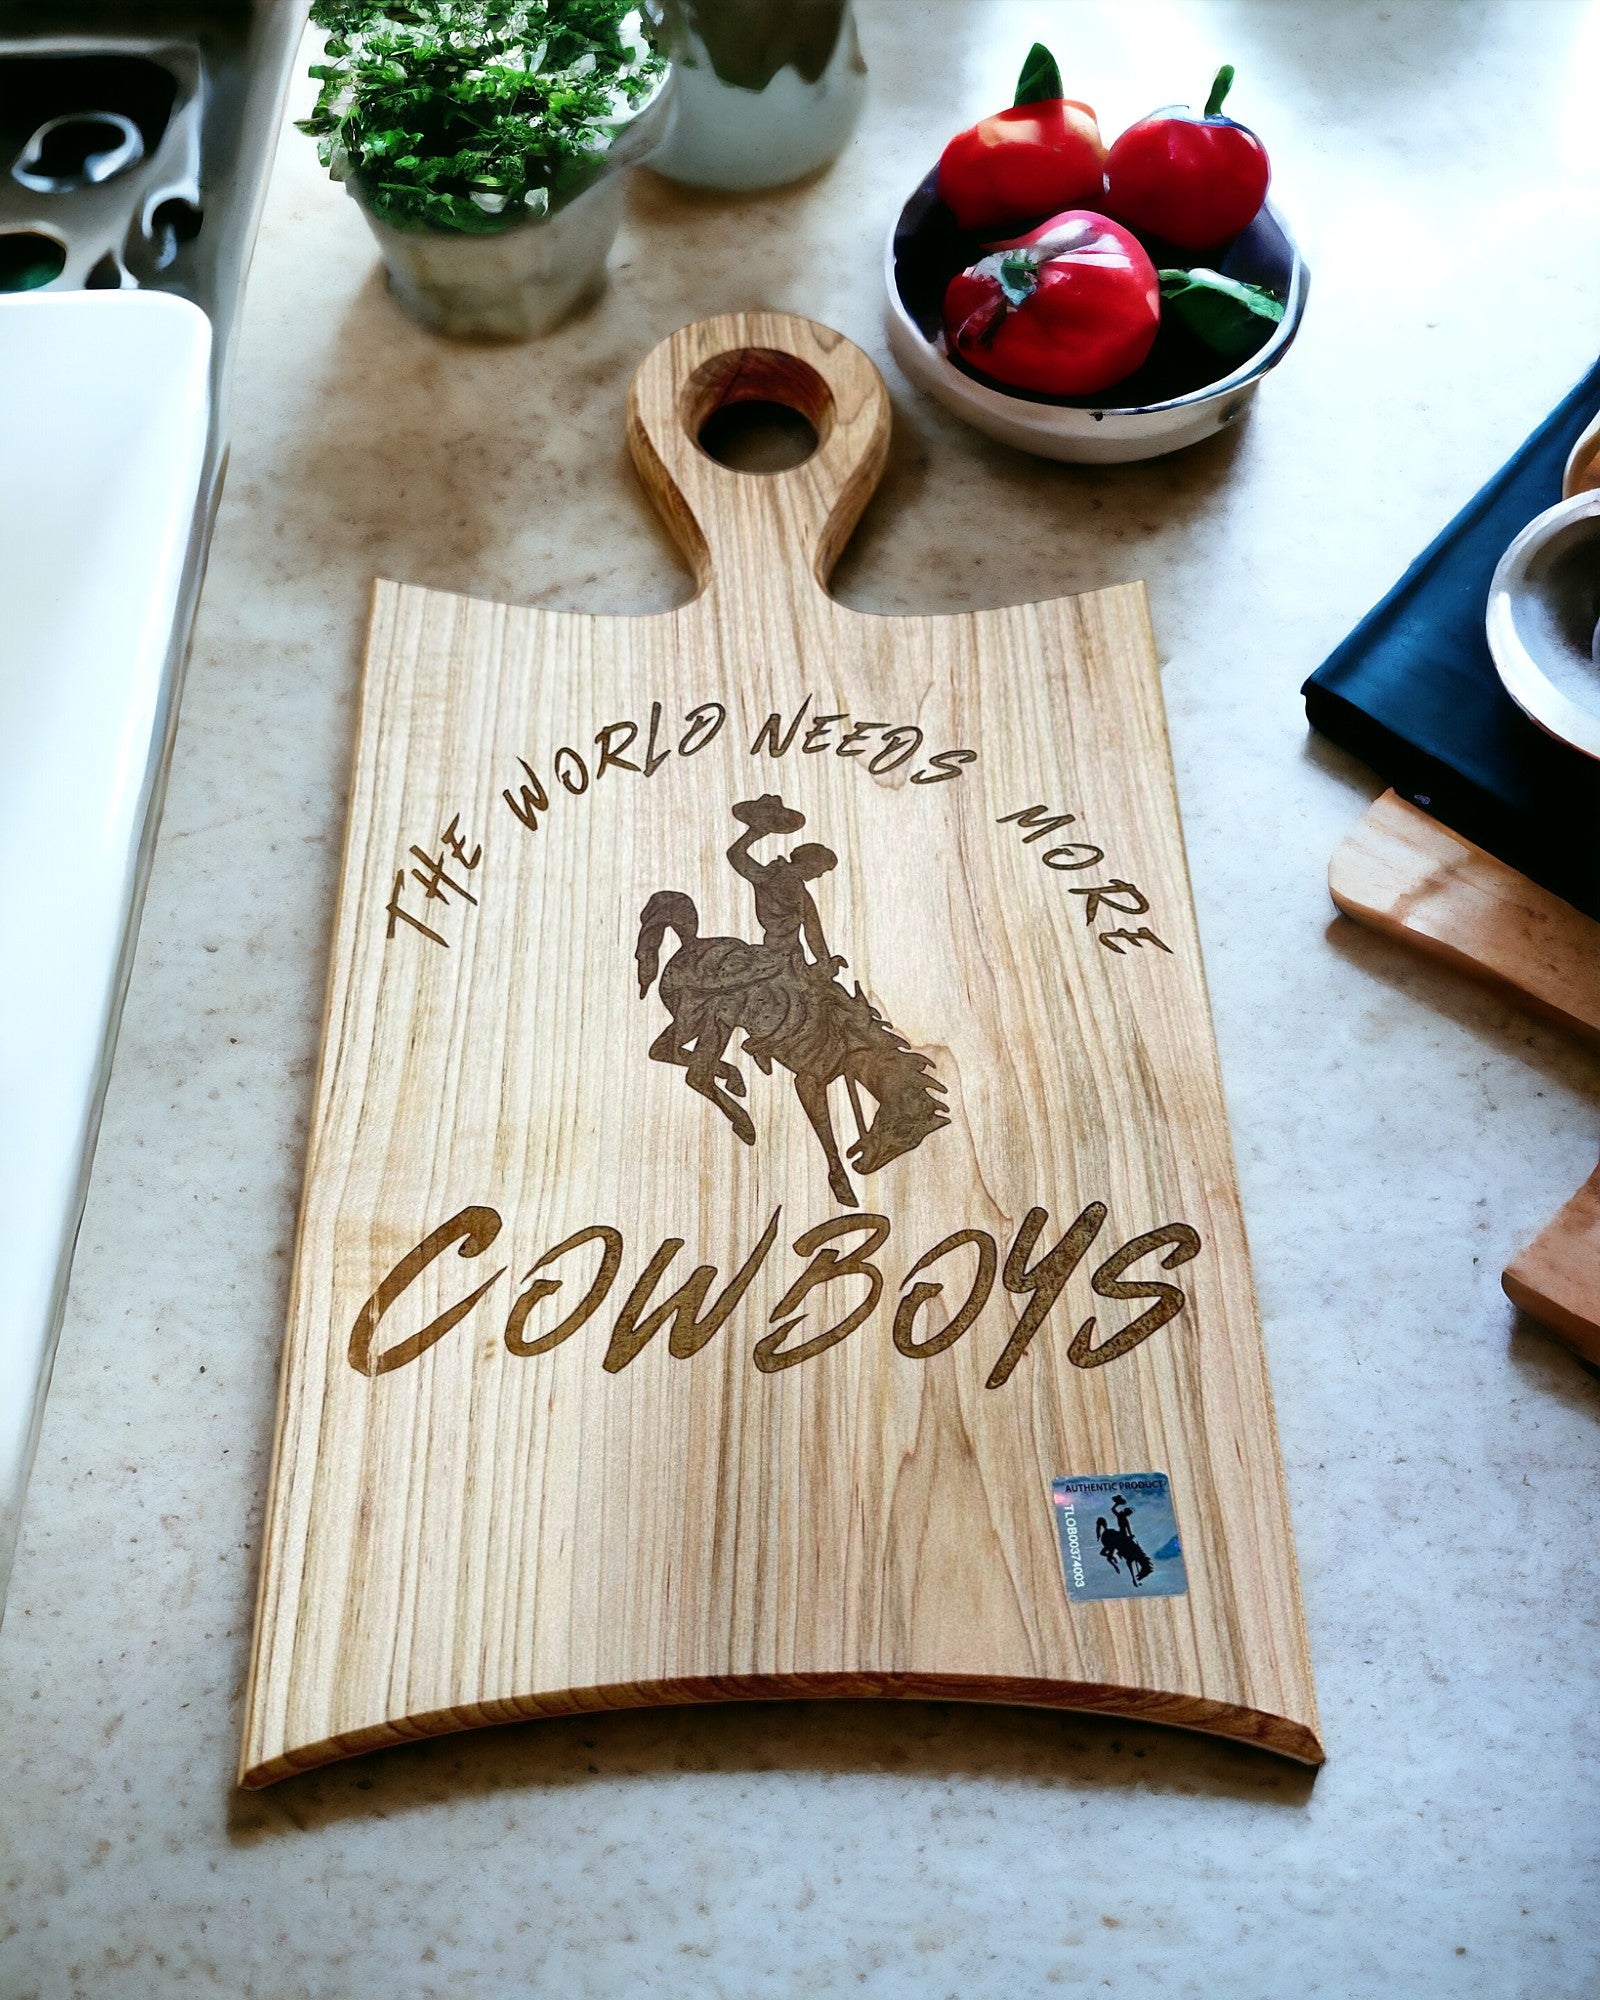 The World Needs More Cowboys Cutting Board